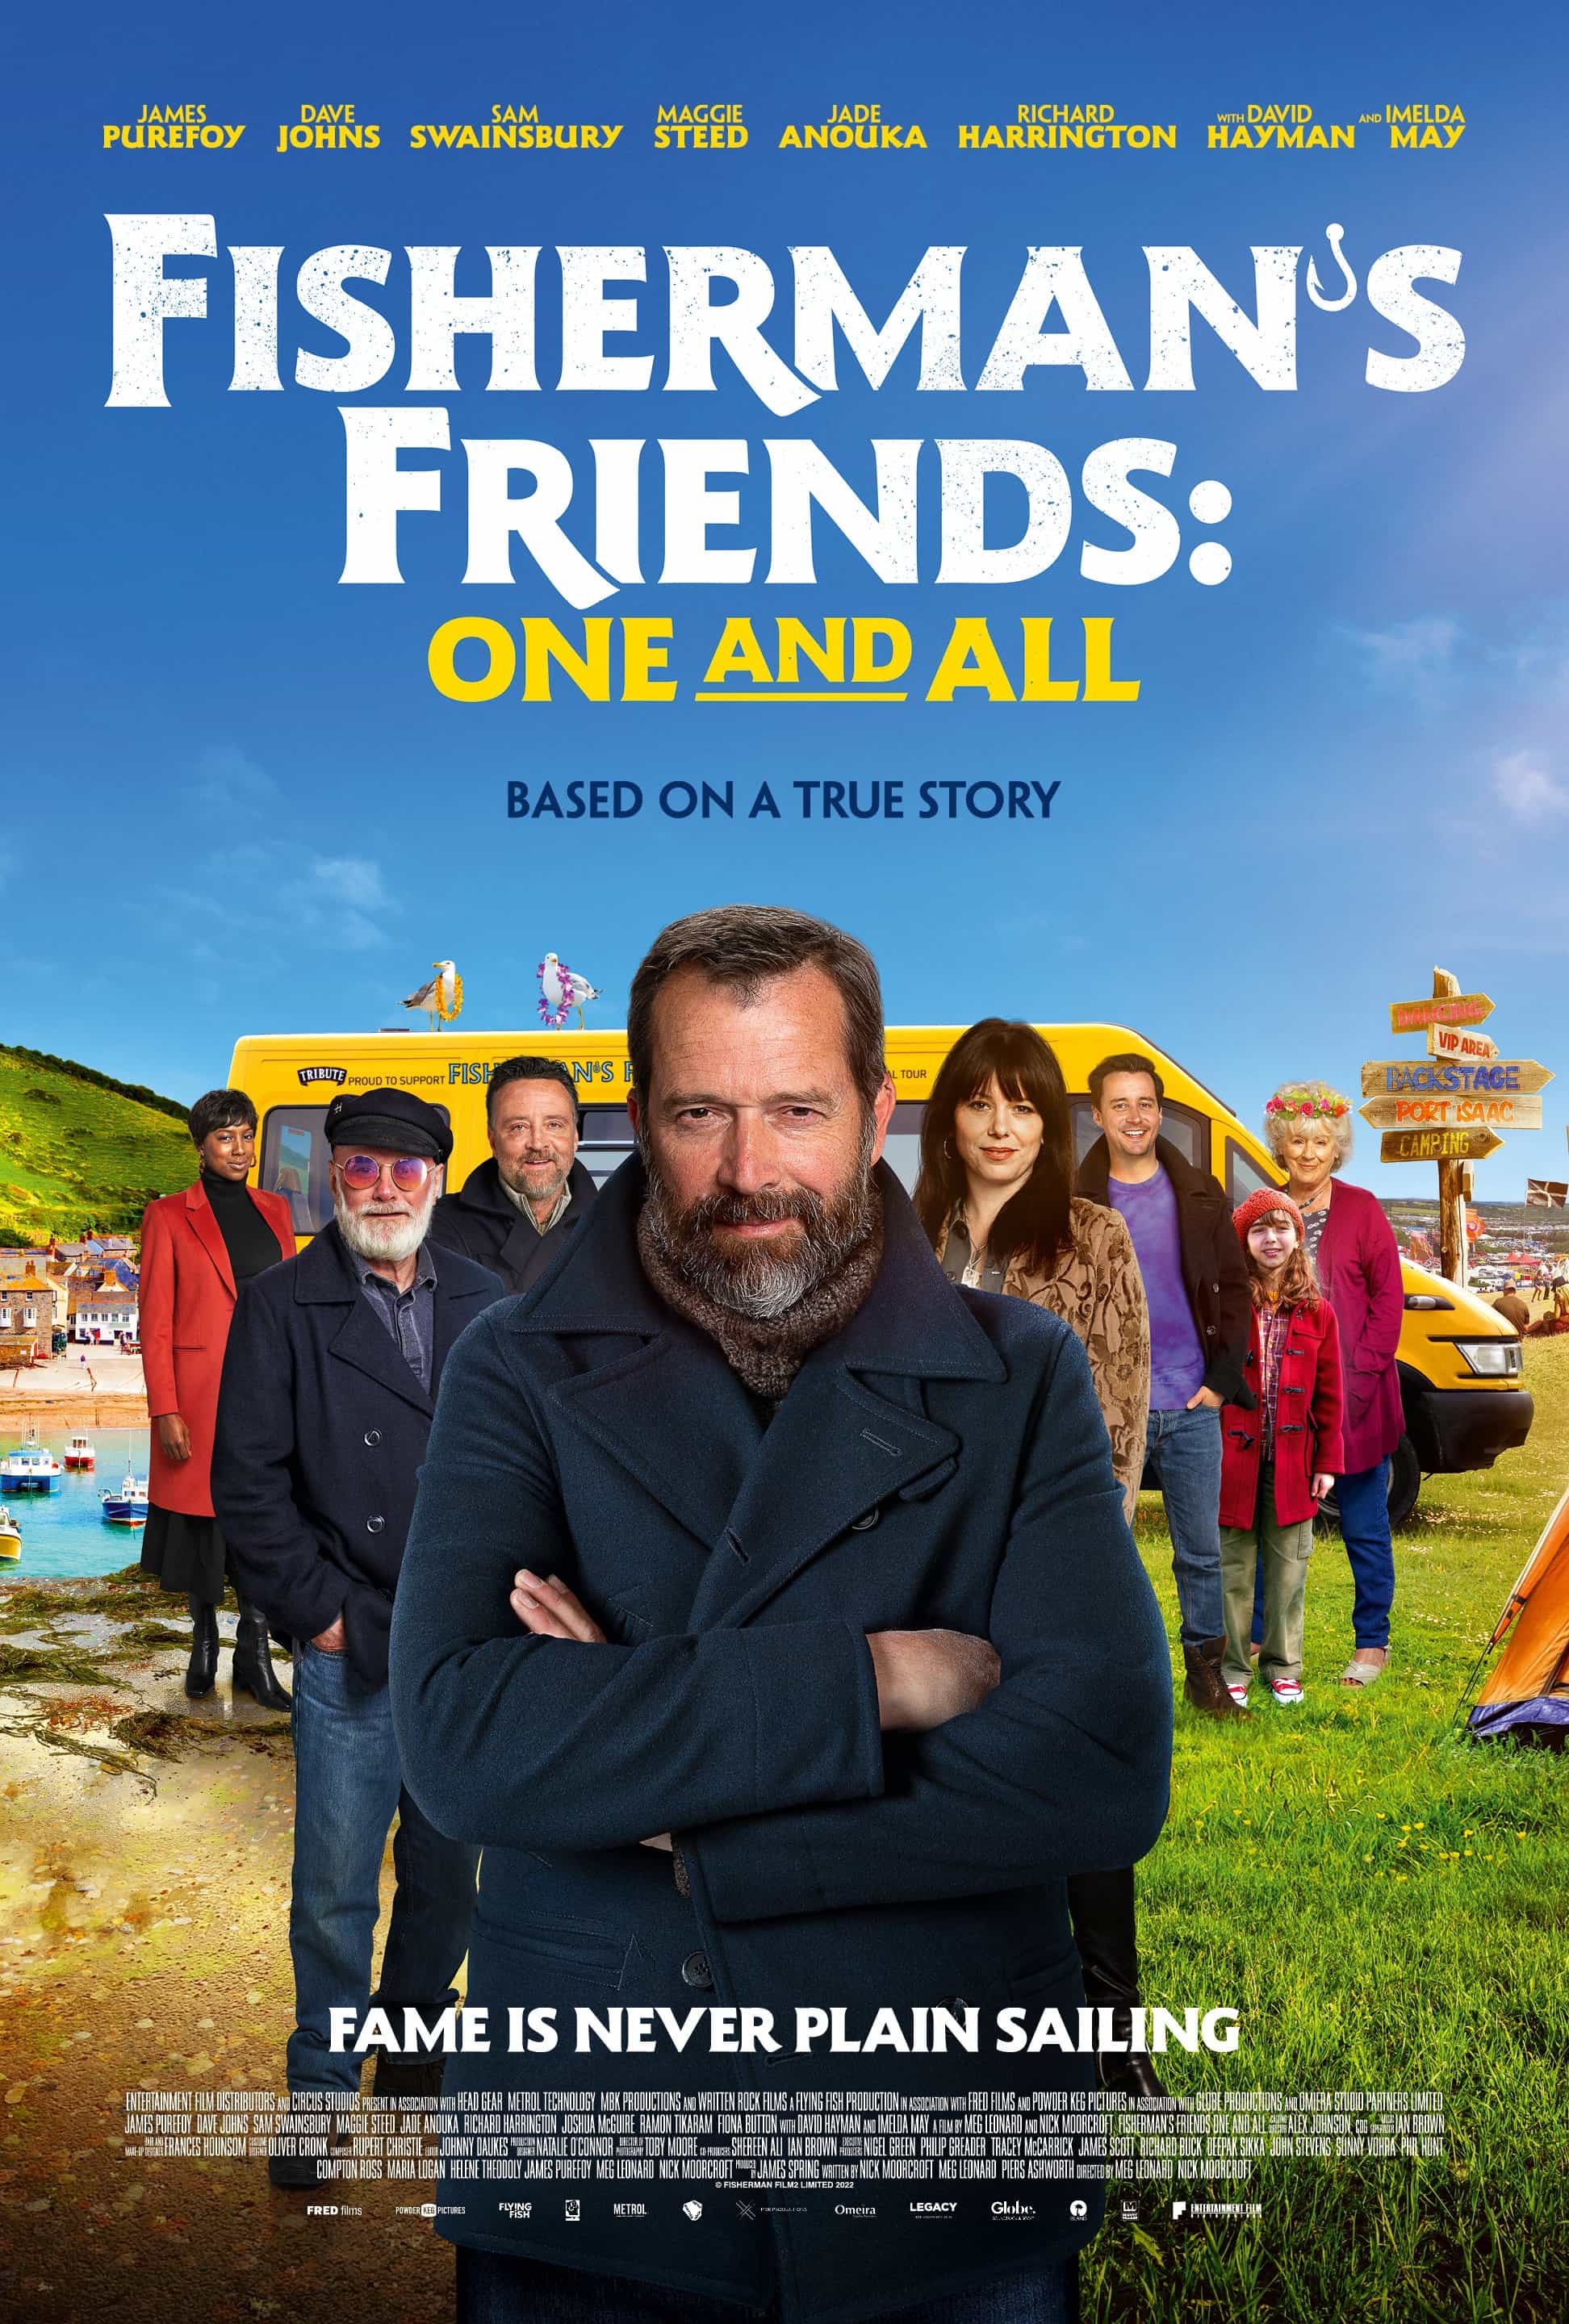 Fishermans Friends: One And All is given a 12A age rating in the UK for moderate sex references, language